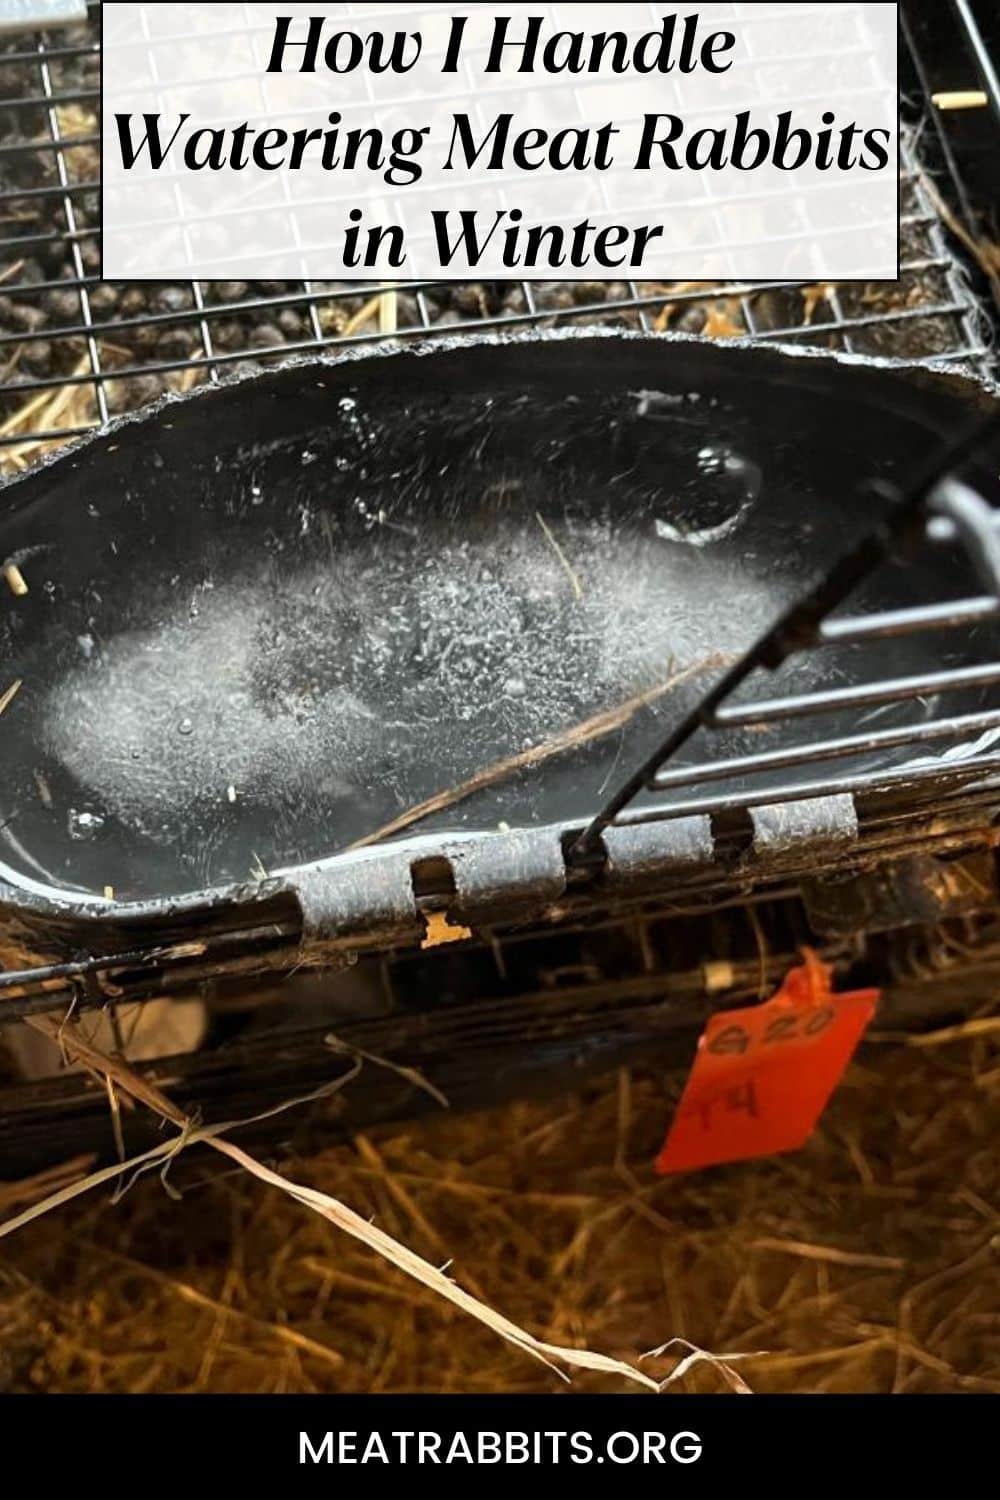 How I Handle Watering Meat Rabbits in Winter pinterest image.